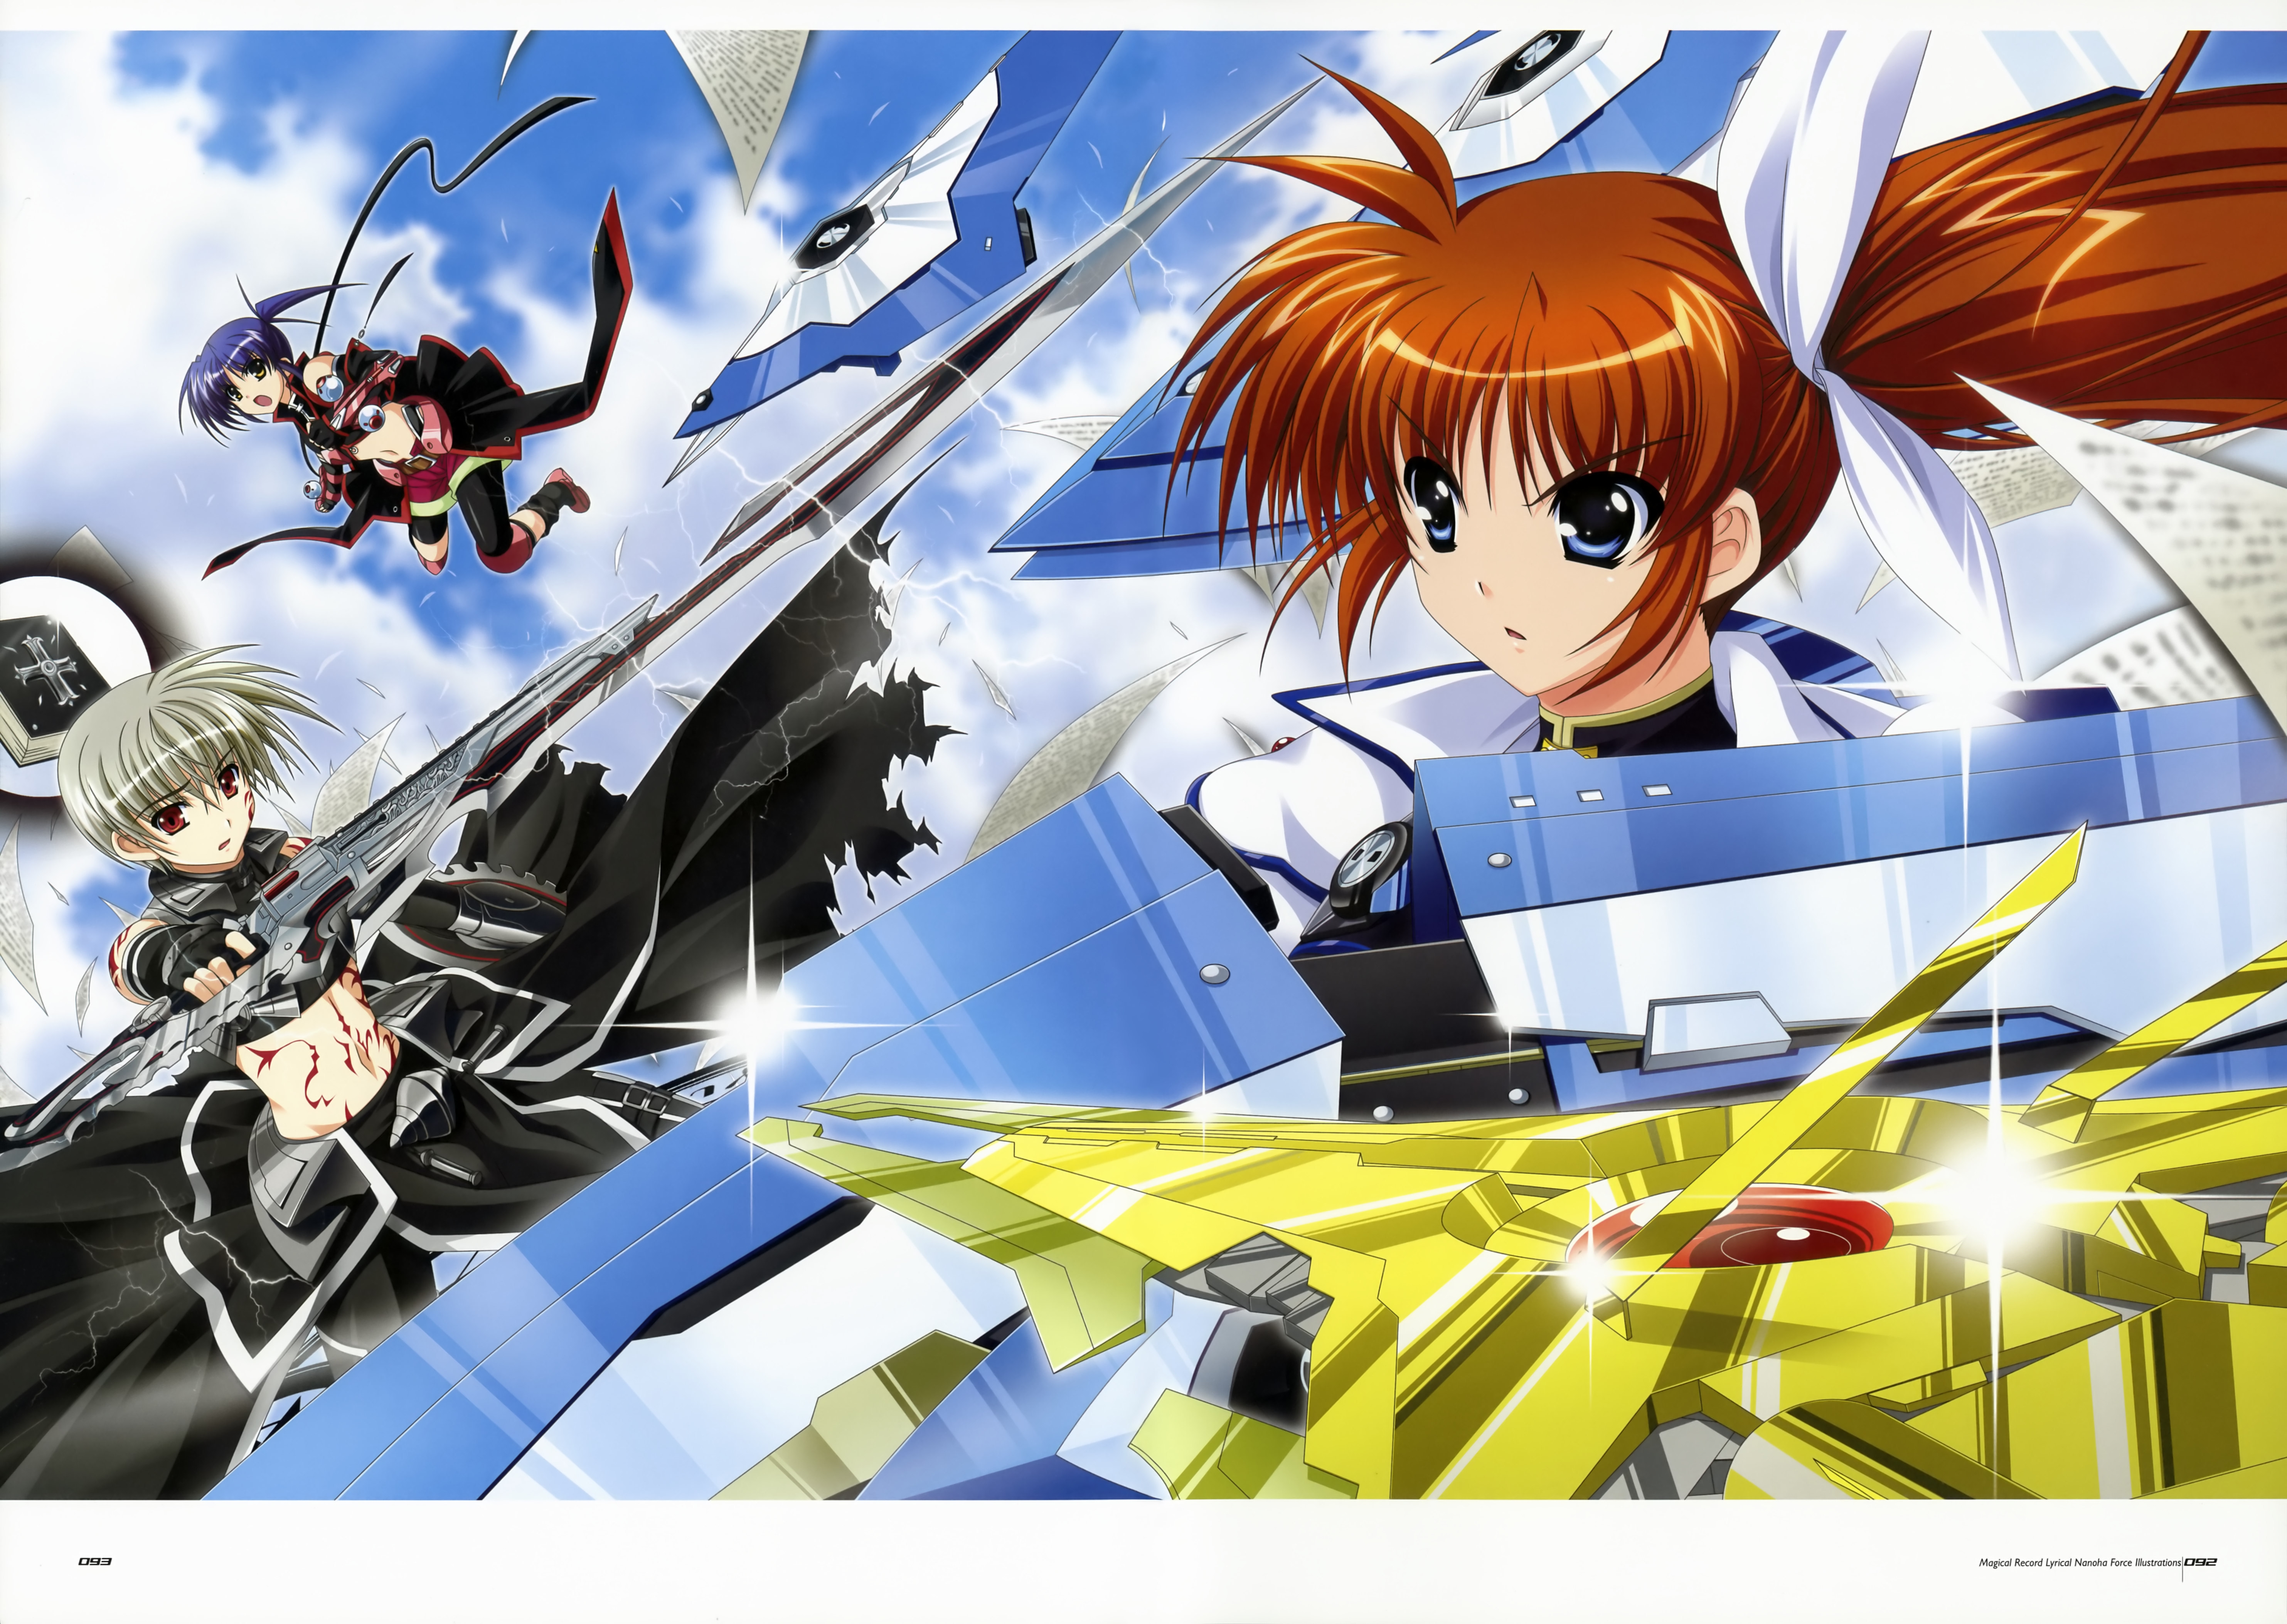 Magical Record Lyrical Nanoha Force Backgrounds, Compatible - PC, Mobile, Gadgets| 5932x4212 px